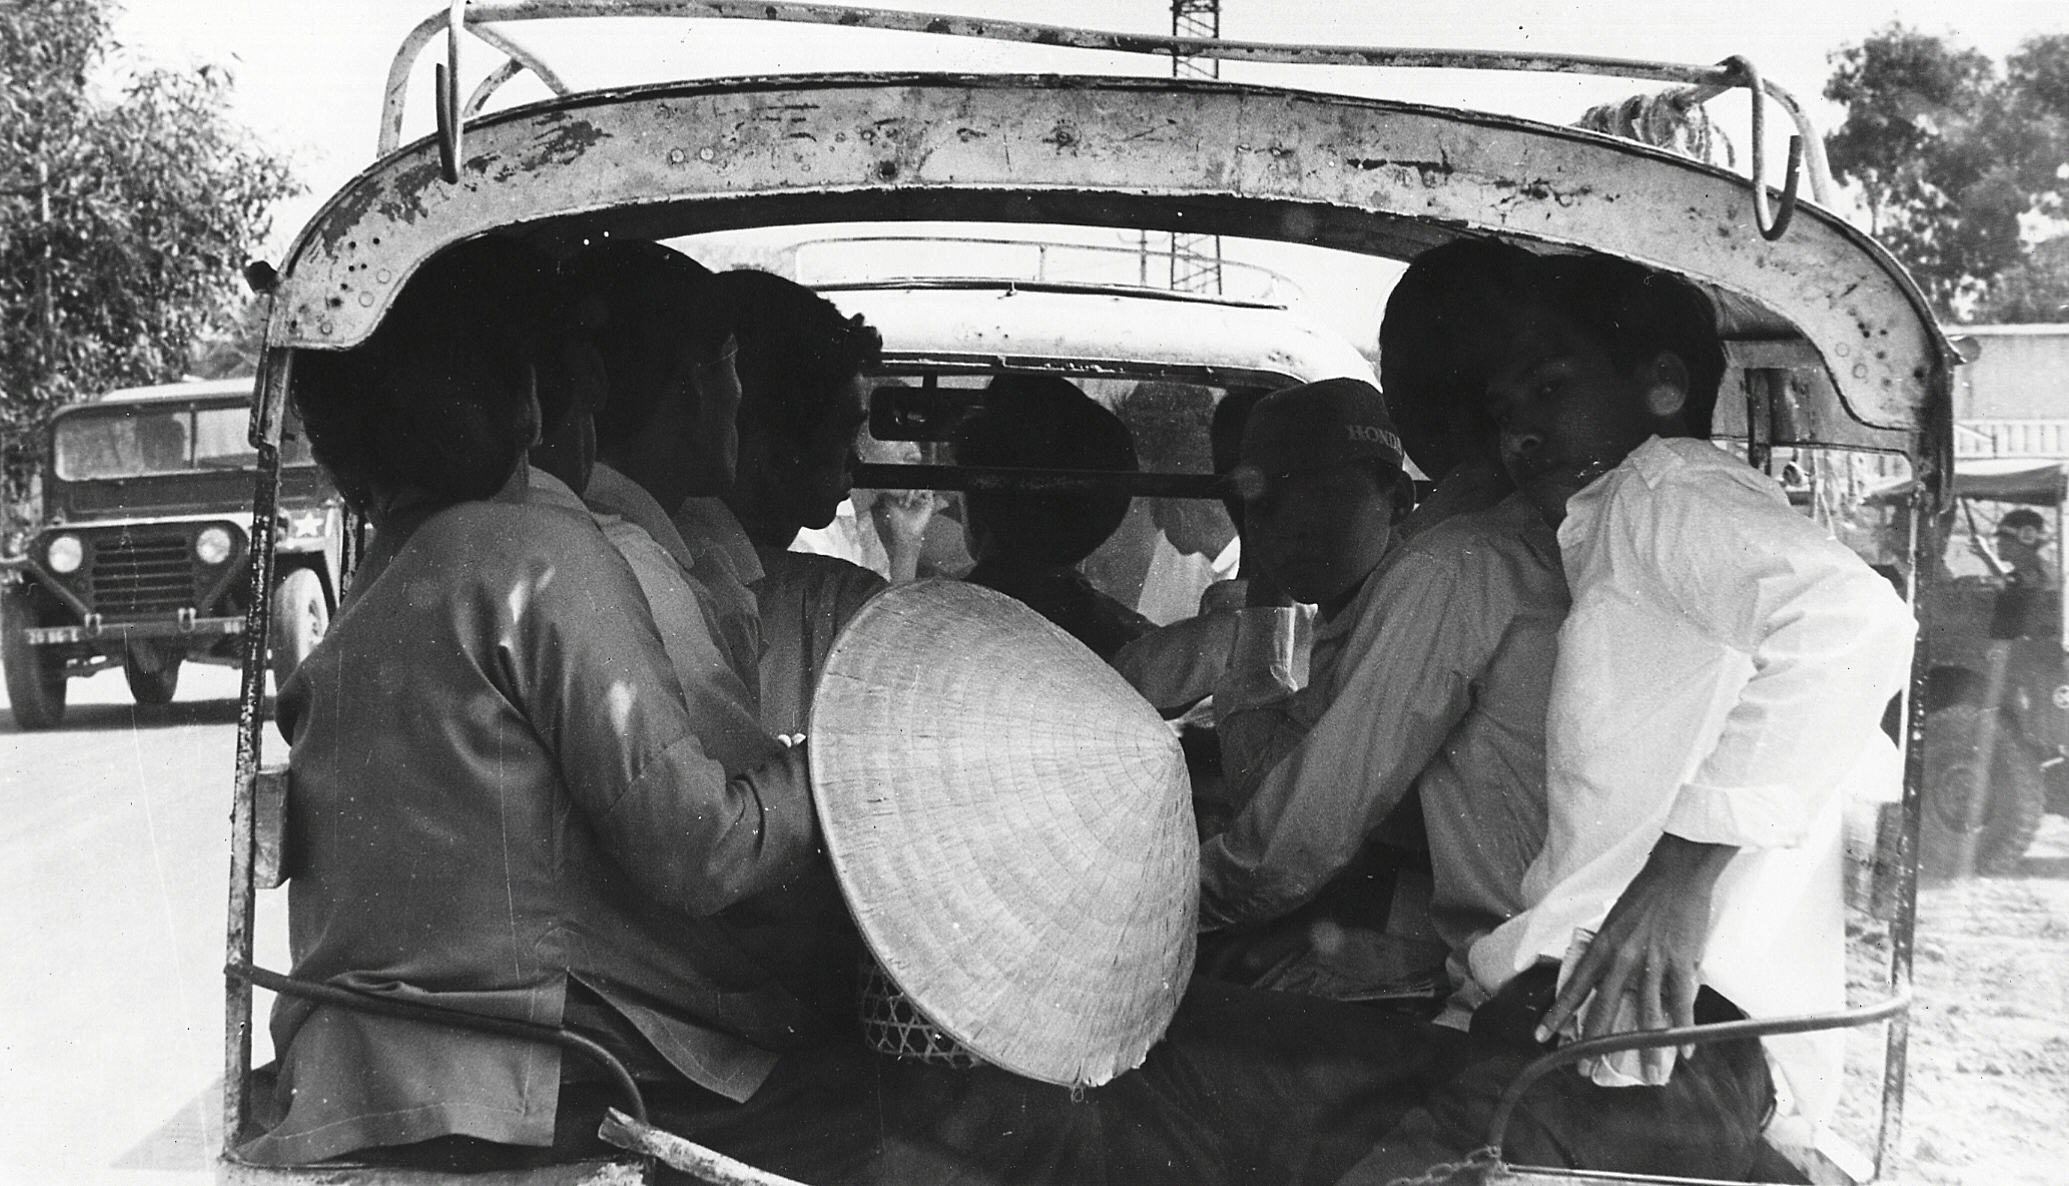 a group of men riding in the back of a truck